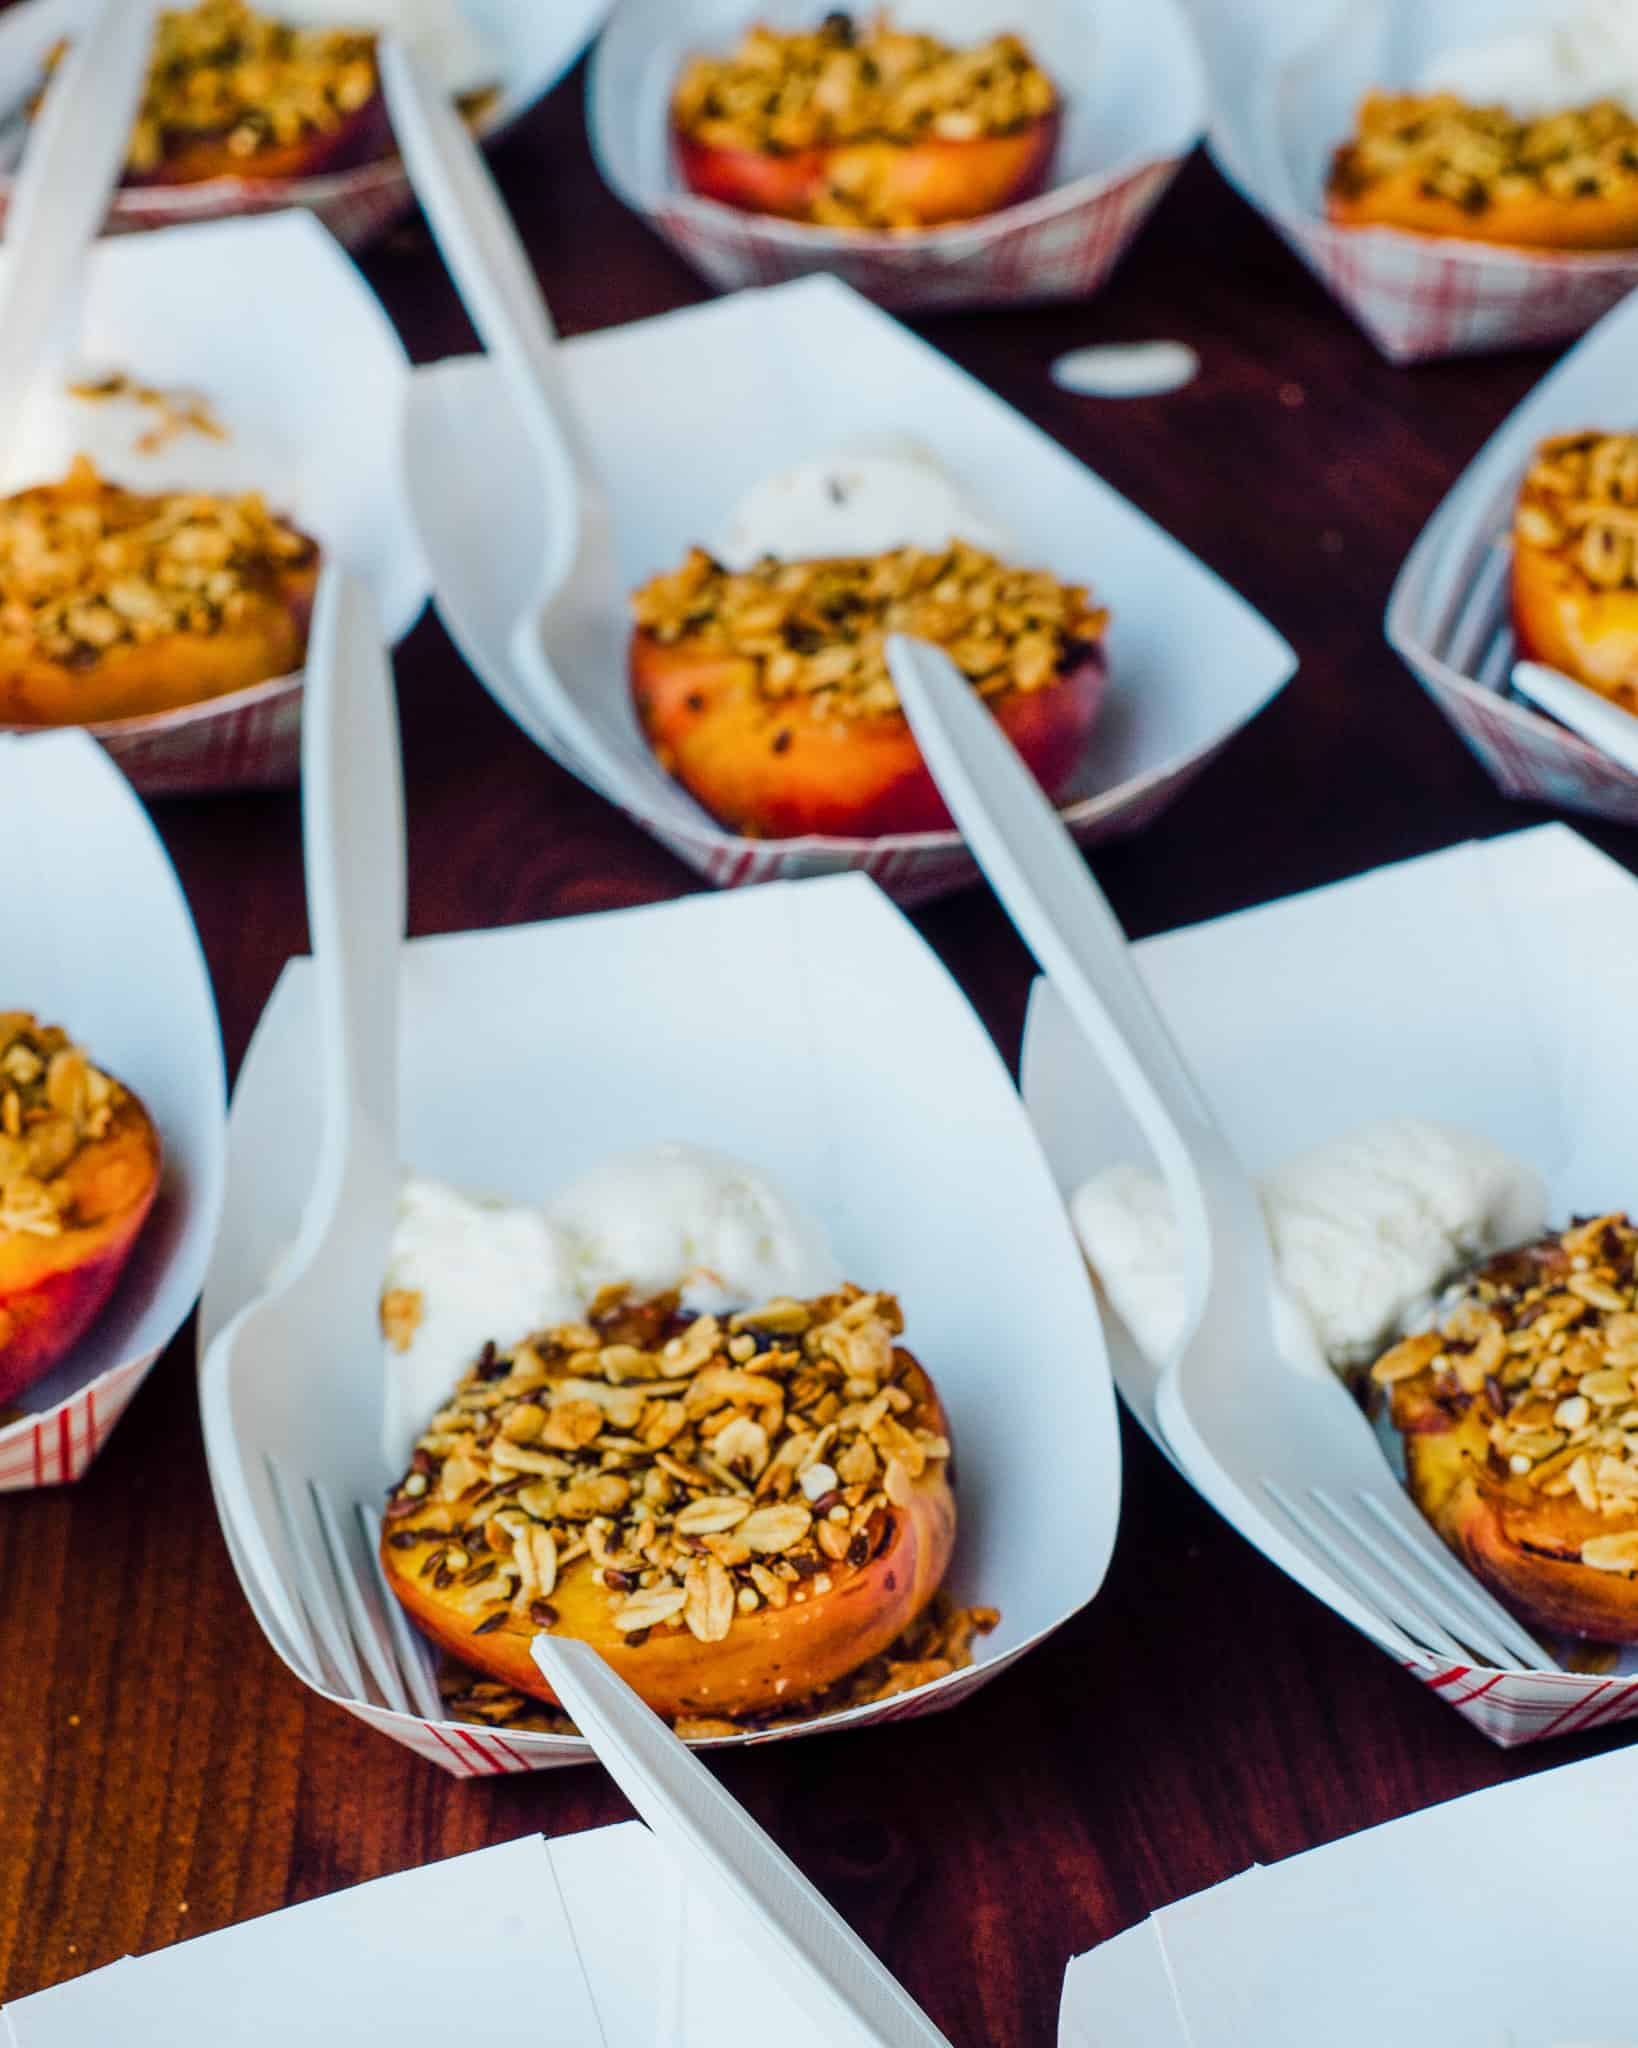 Grilled peaches with crumble (served in paper boats with recyclable forks) for a grilling event we had at Heatherlea Farms.